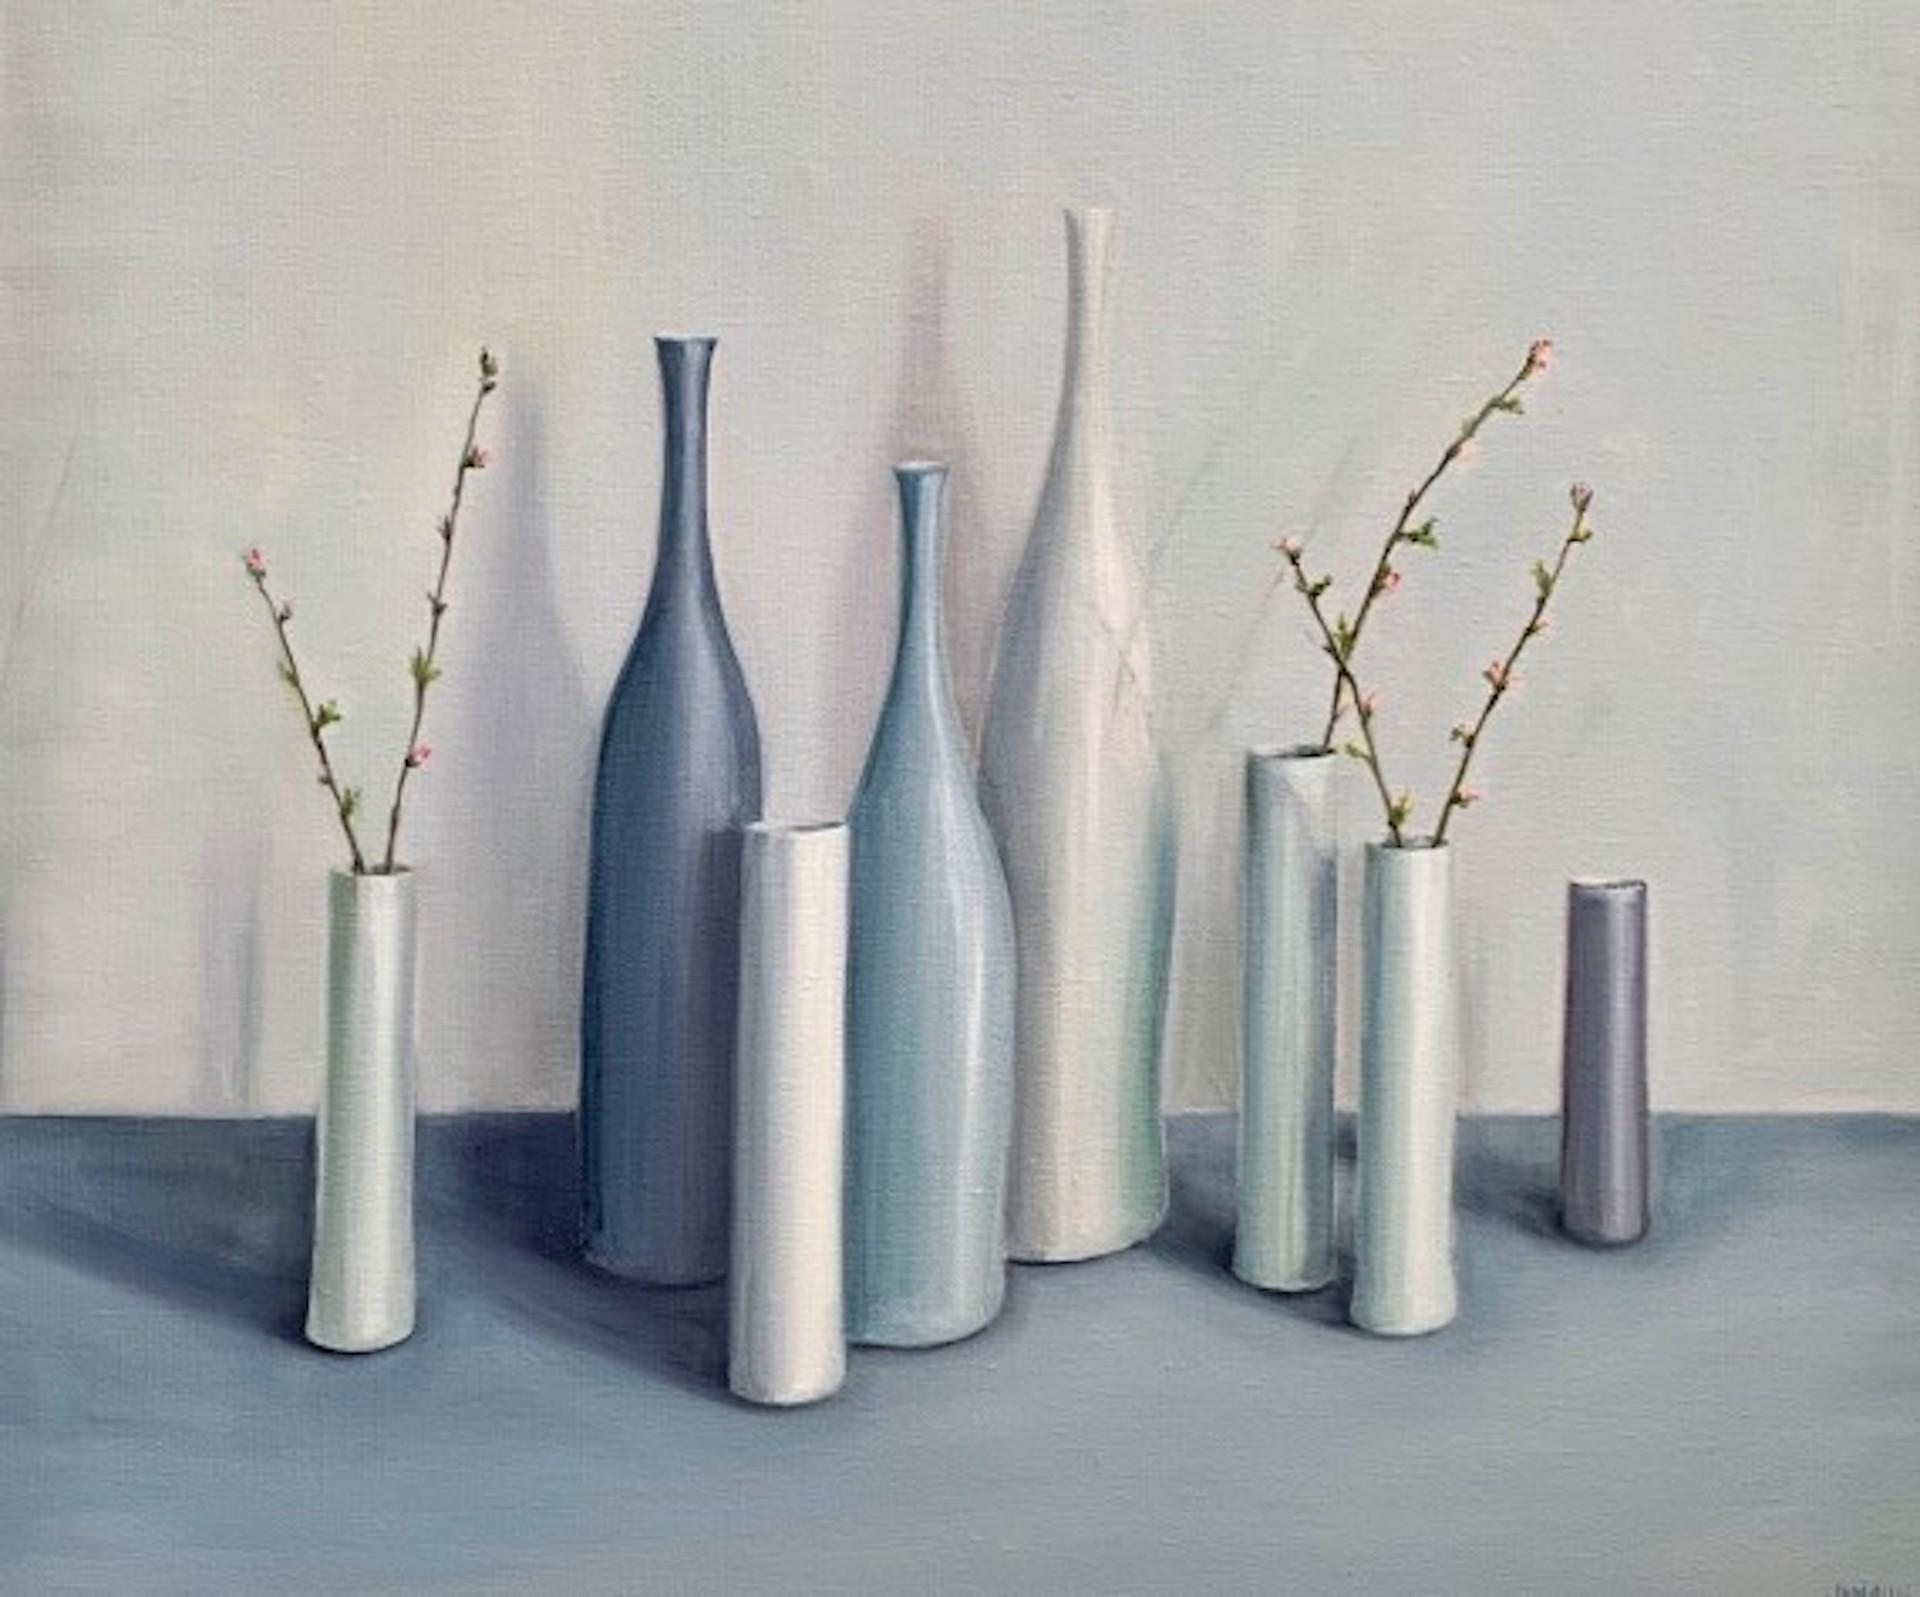 Jonquil Williamson, Bottles and Cylinders with Cherry Blossom Twigs